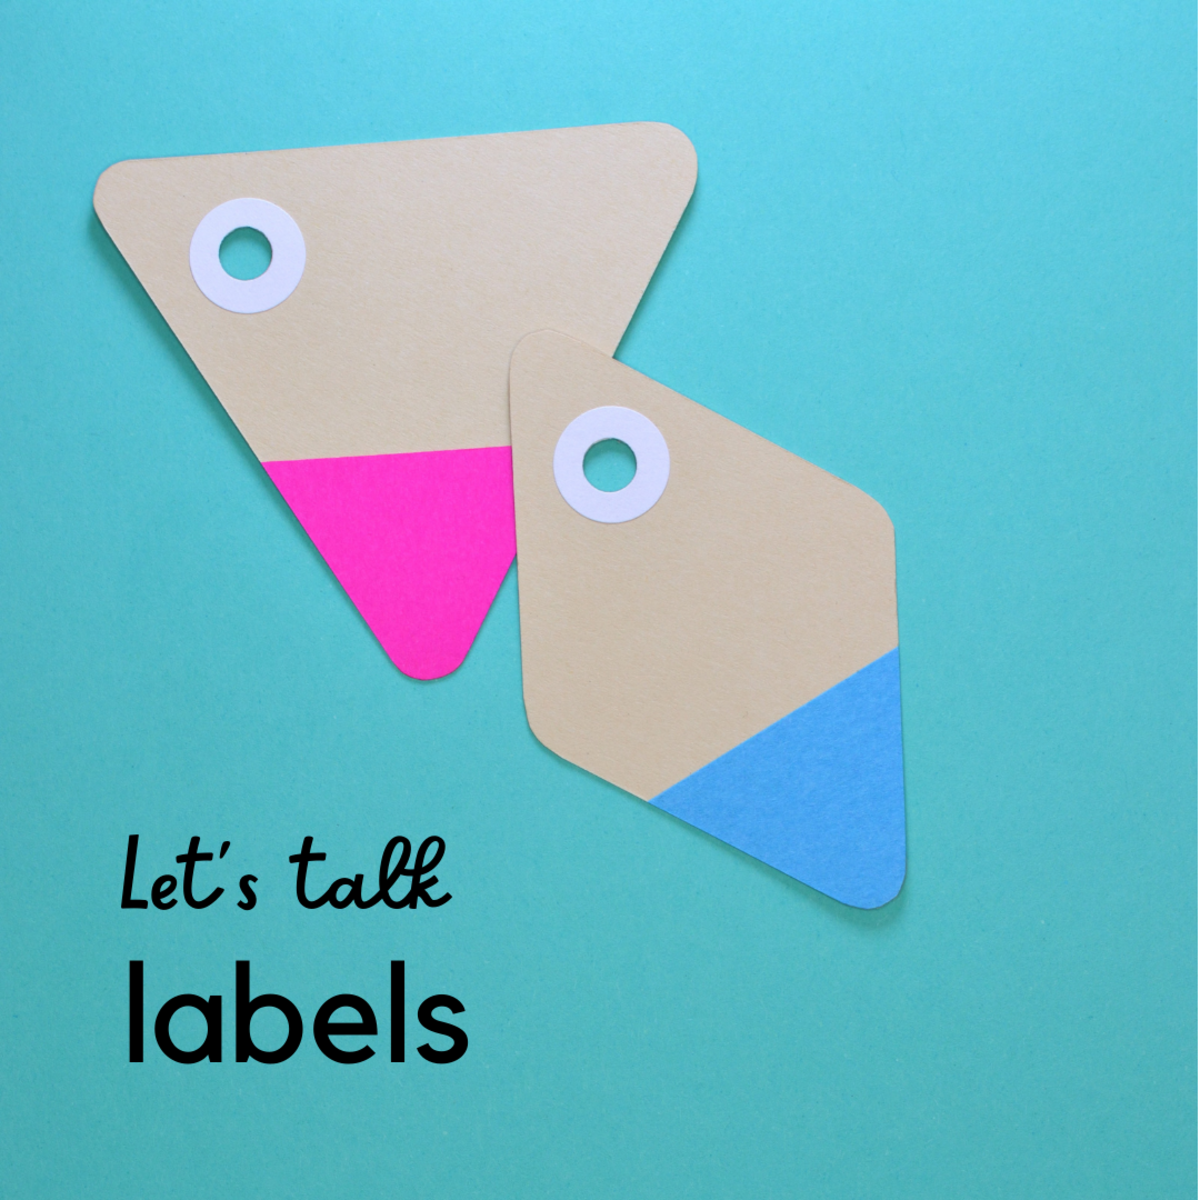 Labels are the way some of us identify ourselves in this world full of diversity. 